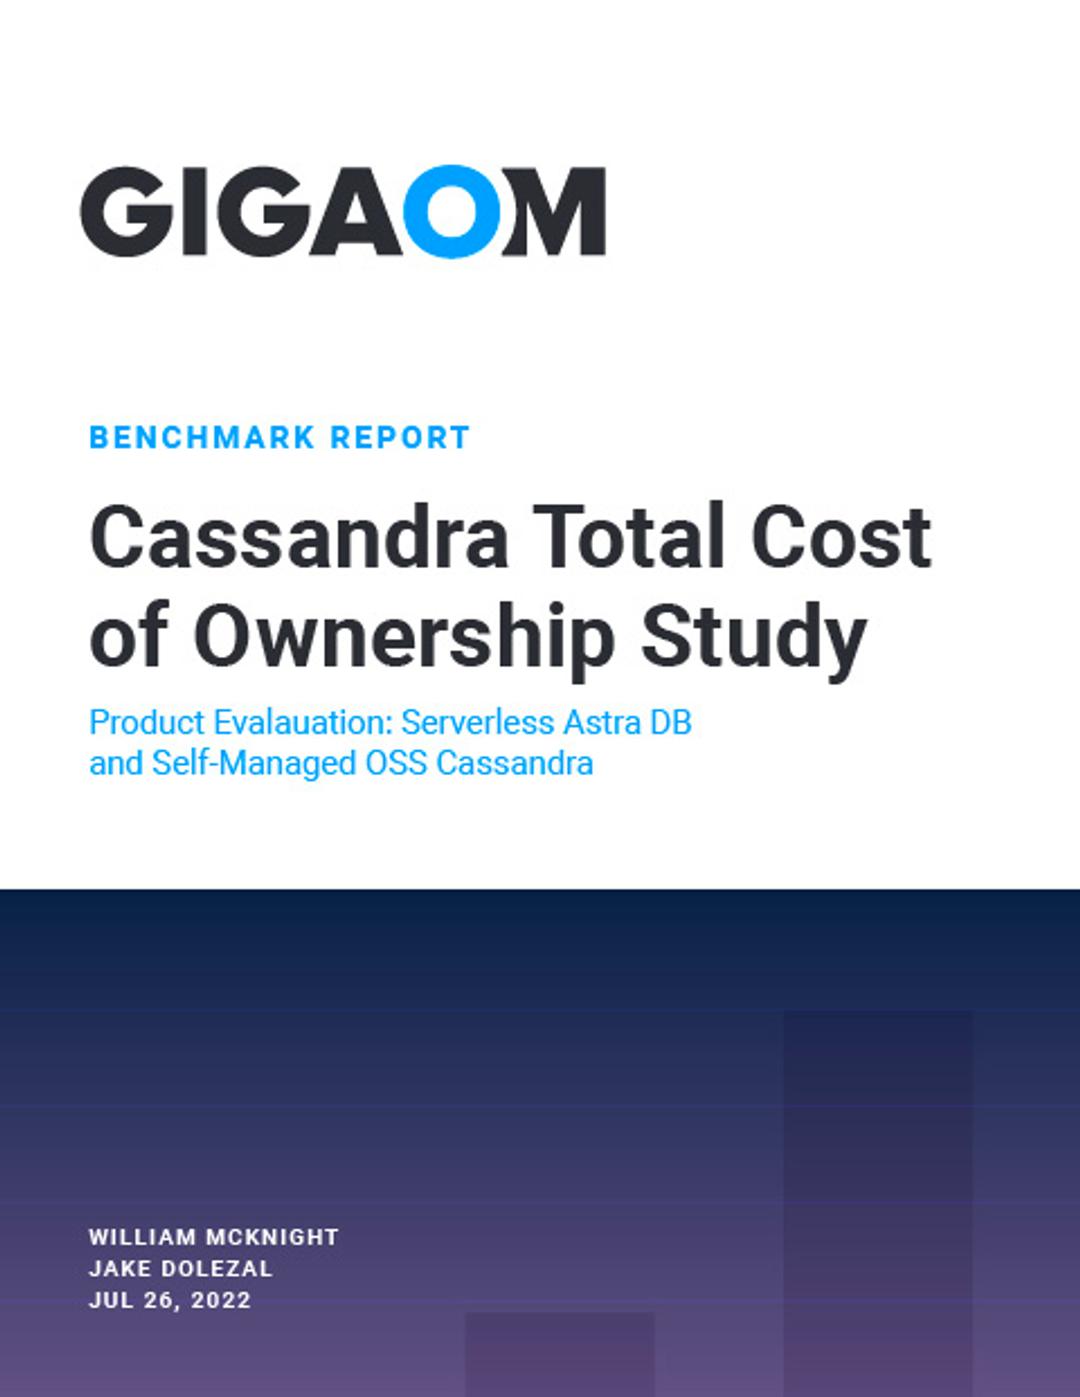 GigaOm Study: Cassandra Total Cost of Ownership 